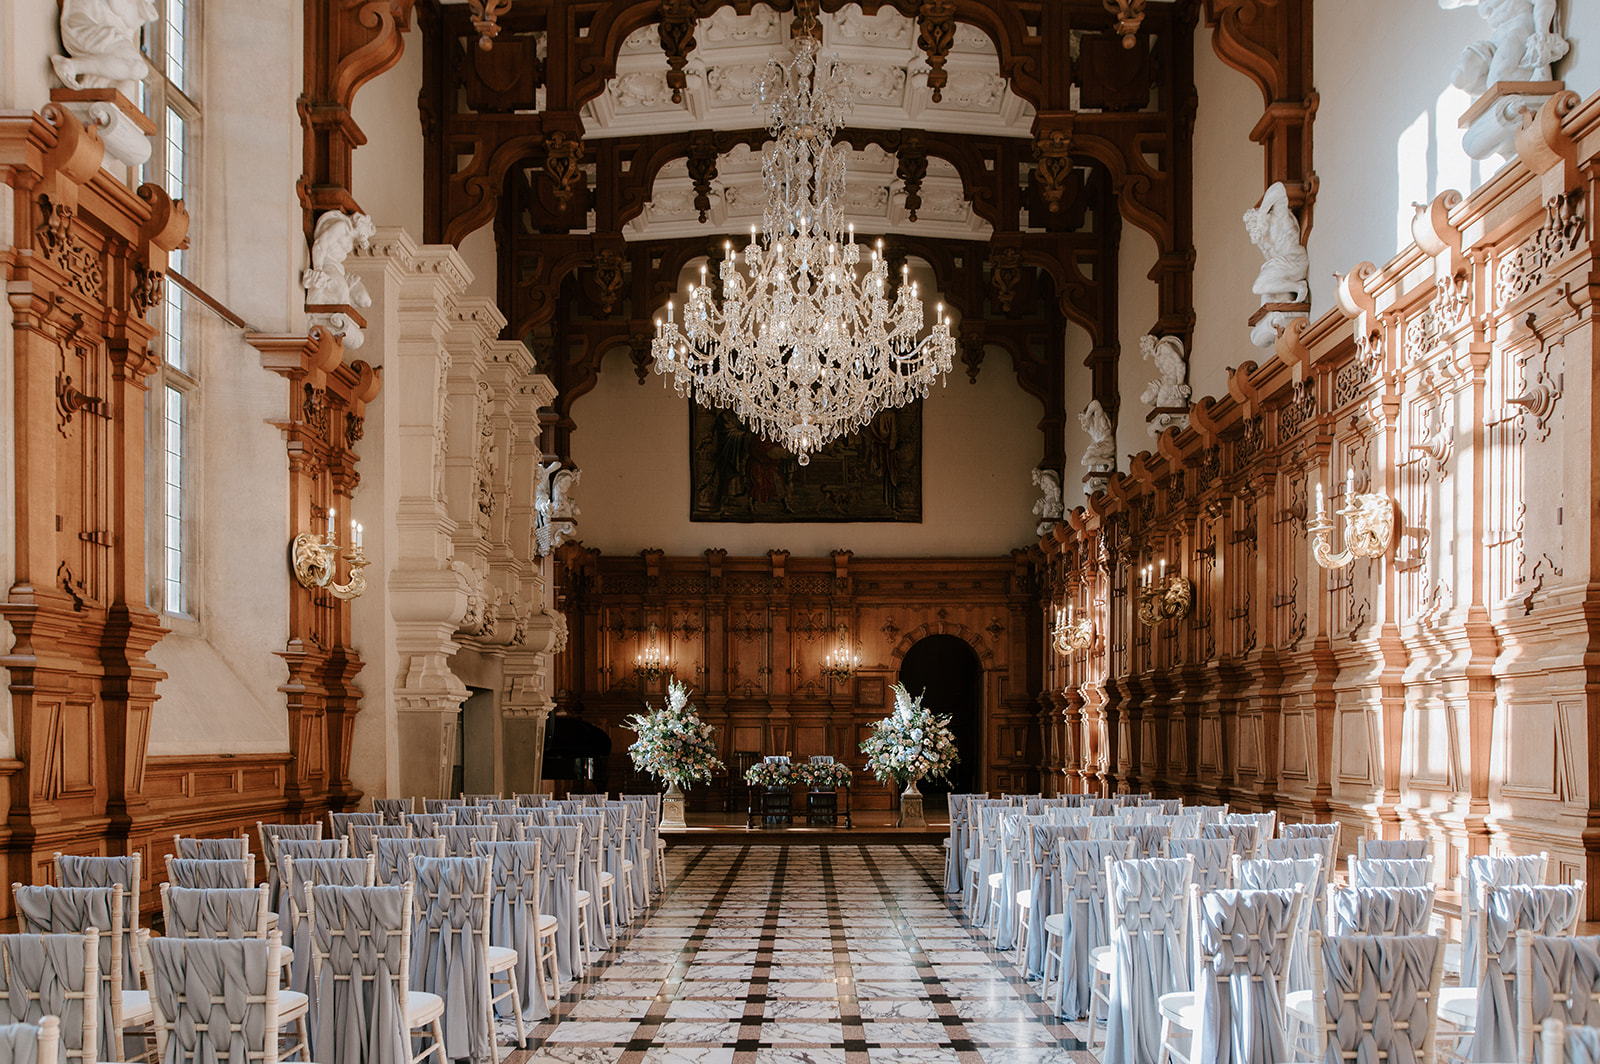 ceremony in the great hall at harlaxton manor